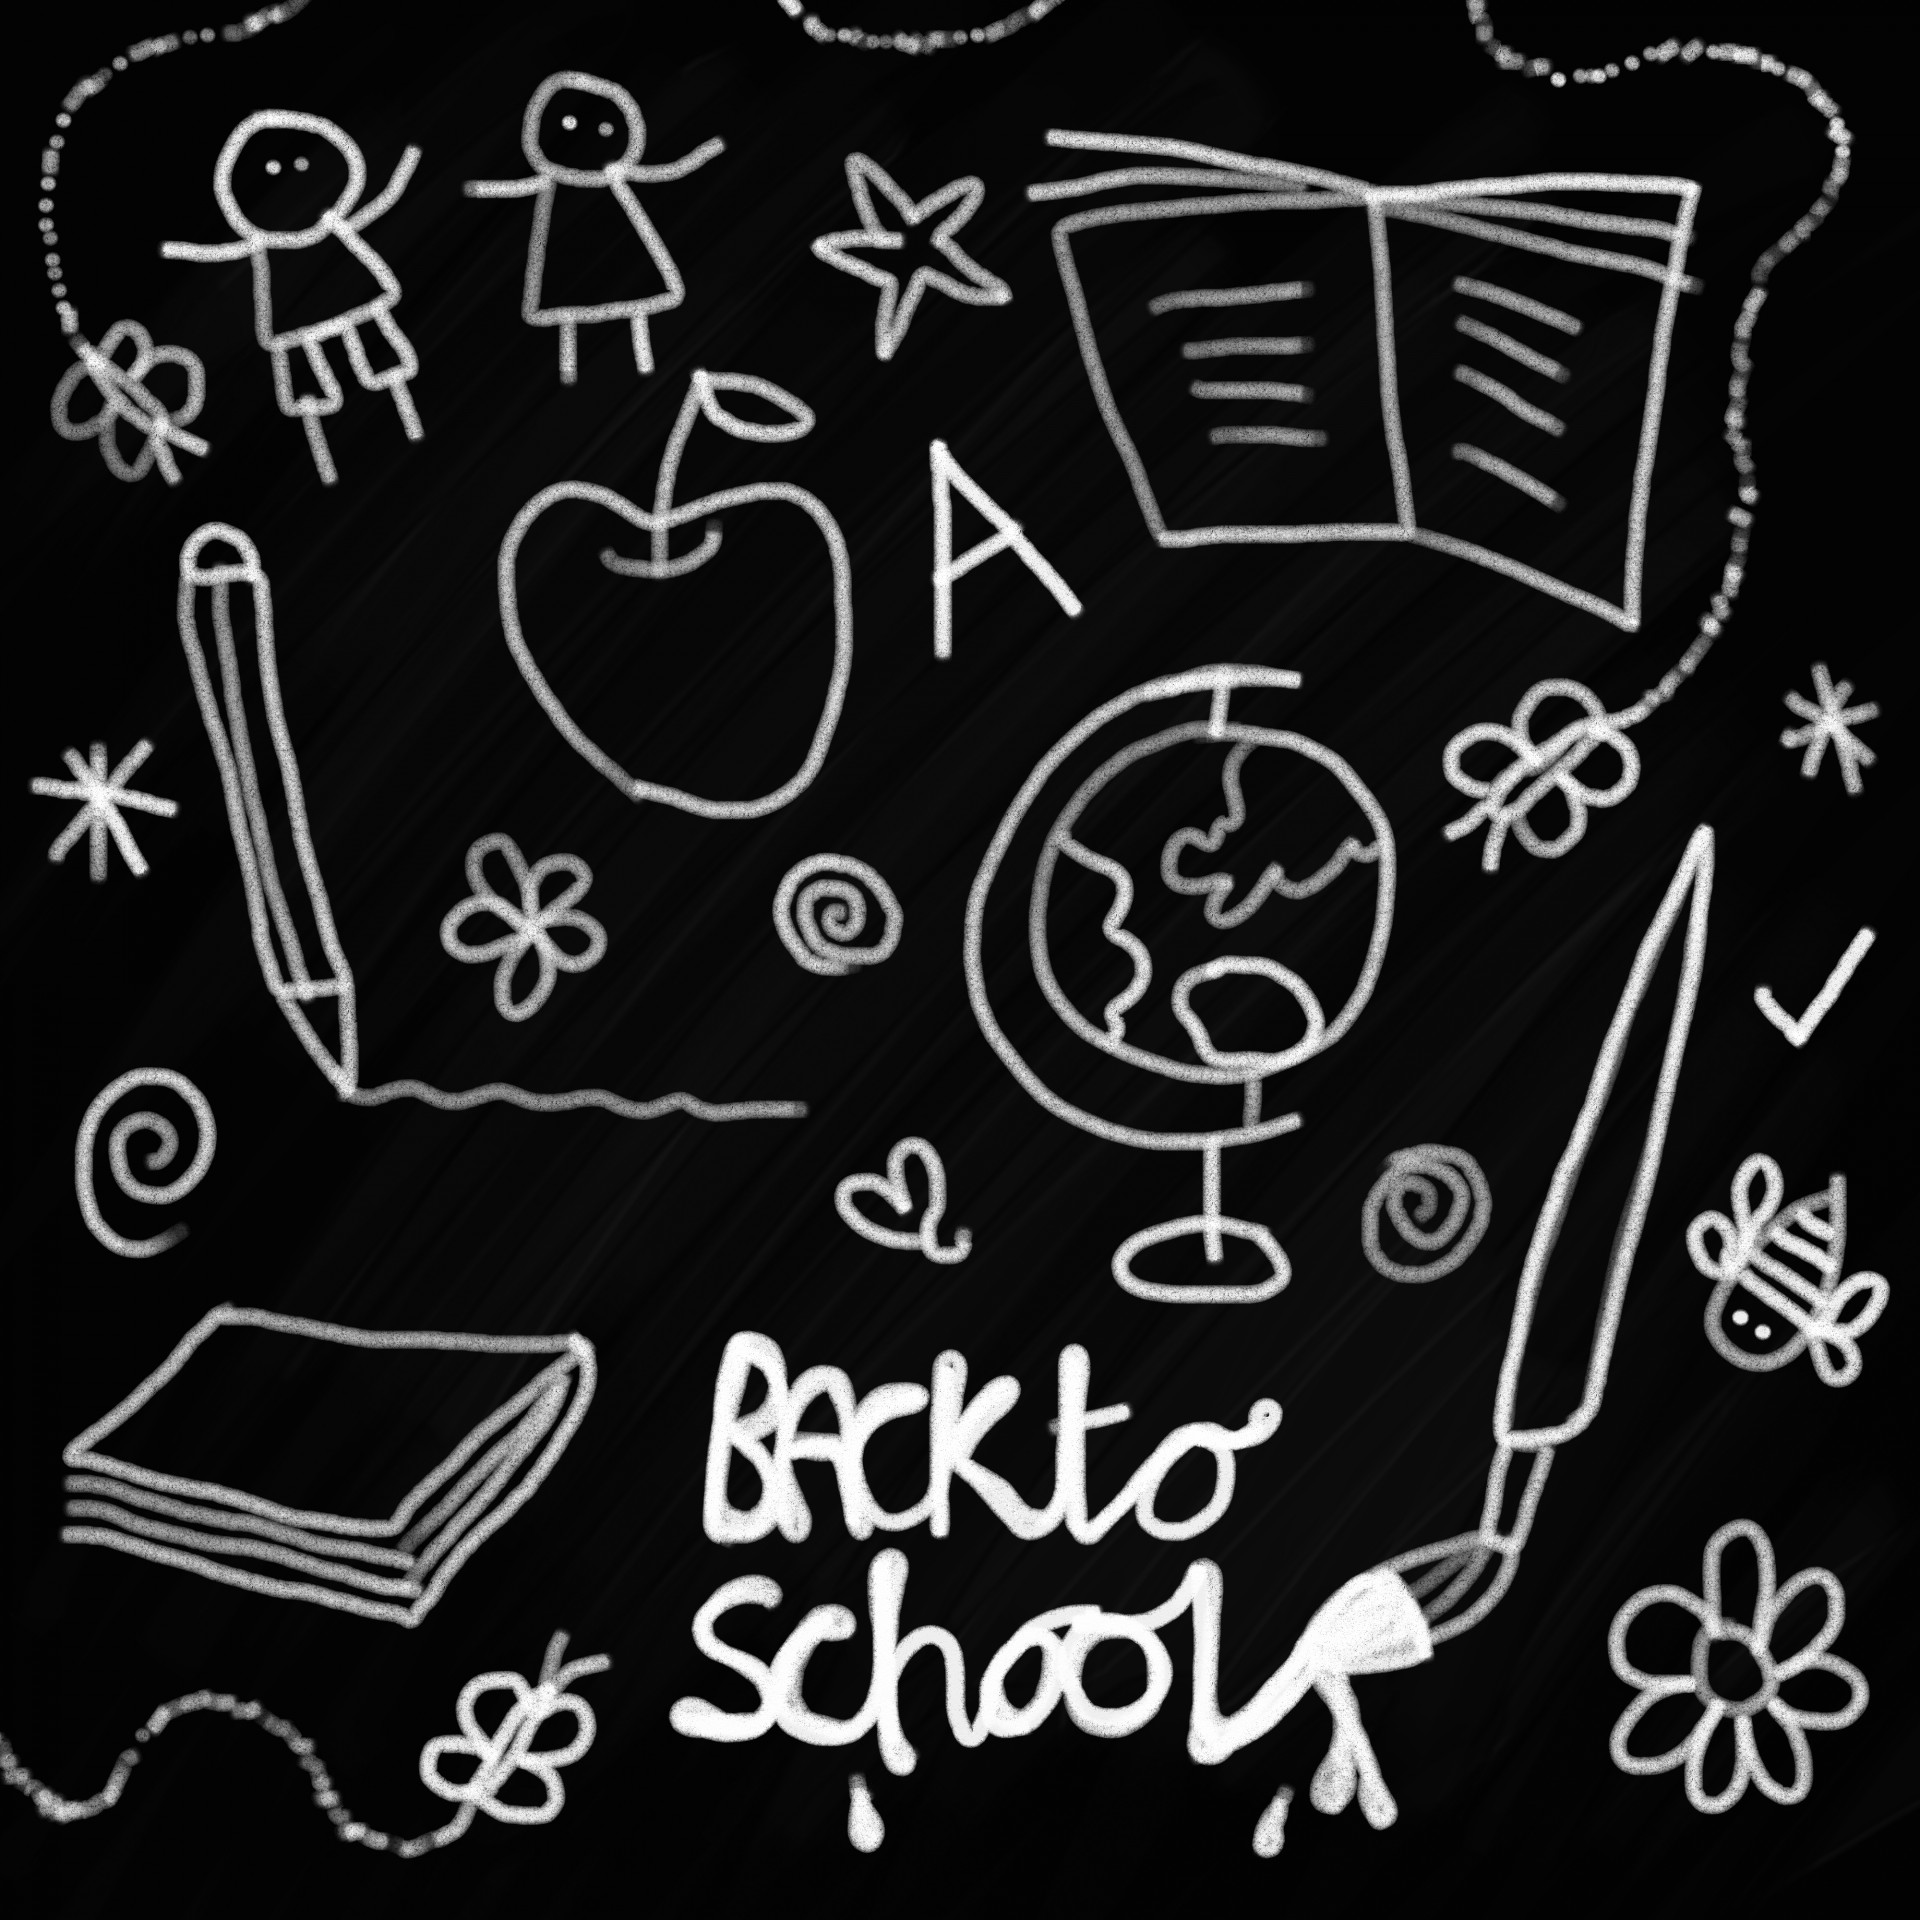 White chalk board like drawings on black background. Includes books, kids, an apple, stars, swirls, pencil, paper, a globe, and paintbrush painting the words back to school